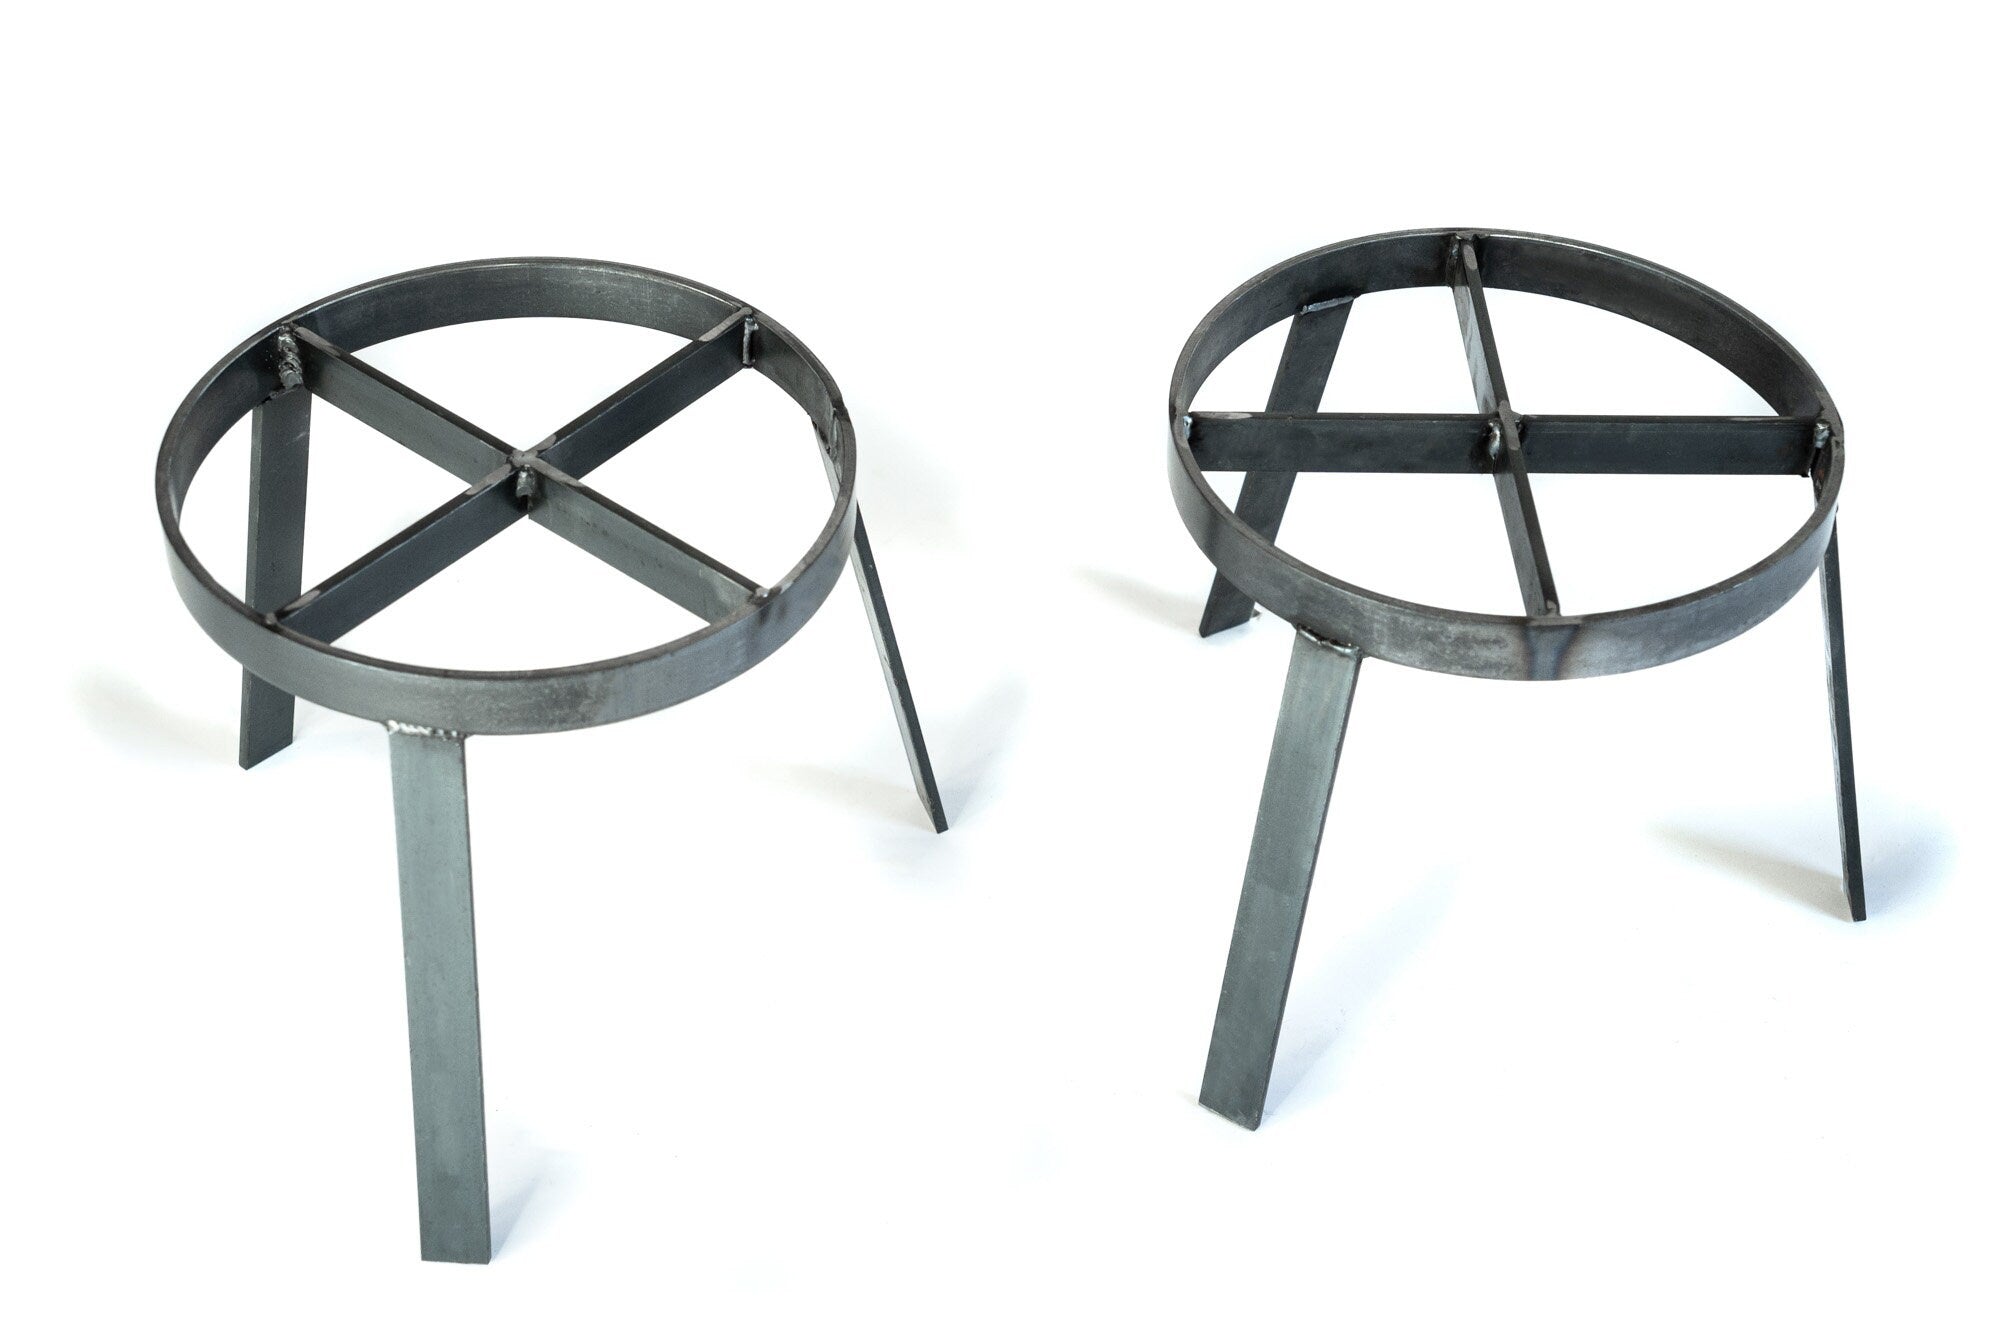 Gaucholife Grill Cooking Stands for the open fire. Heavy Duty Iron Contruccion 11.8 diameter